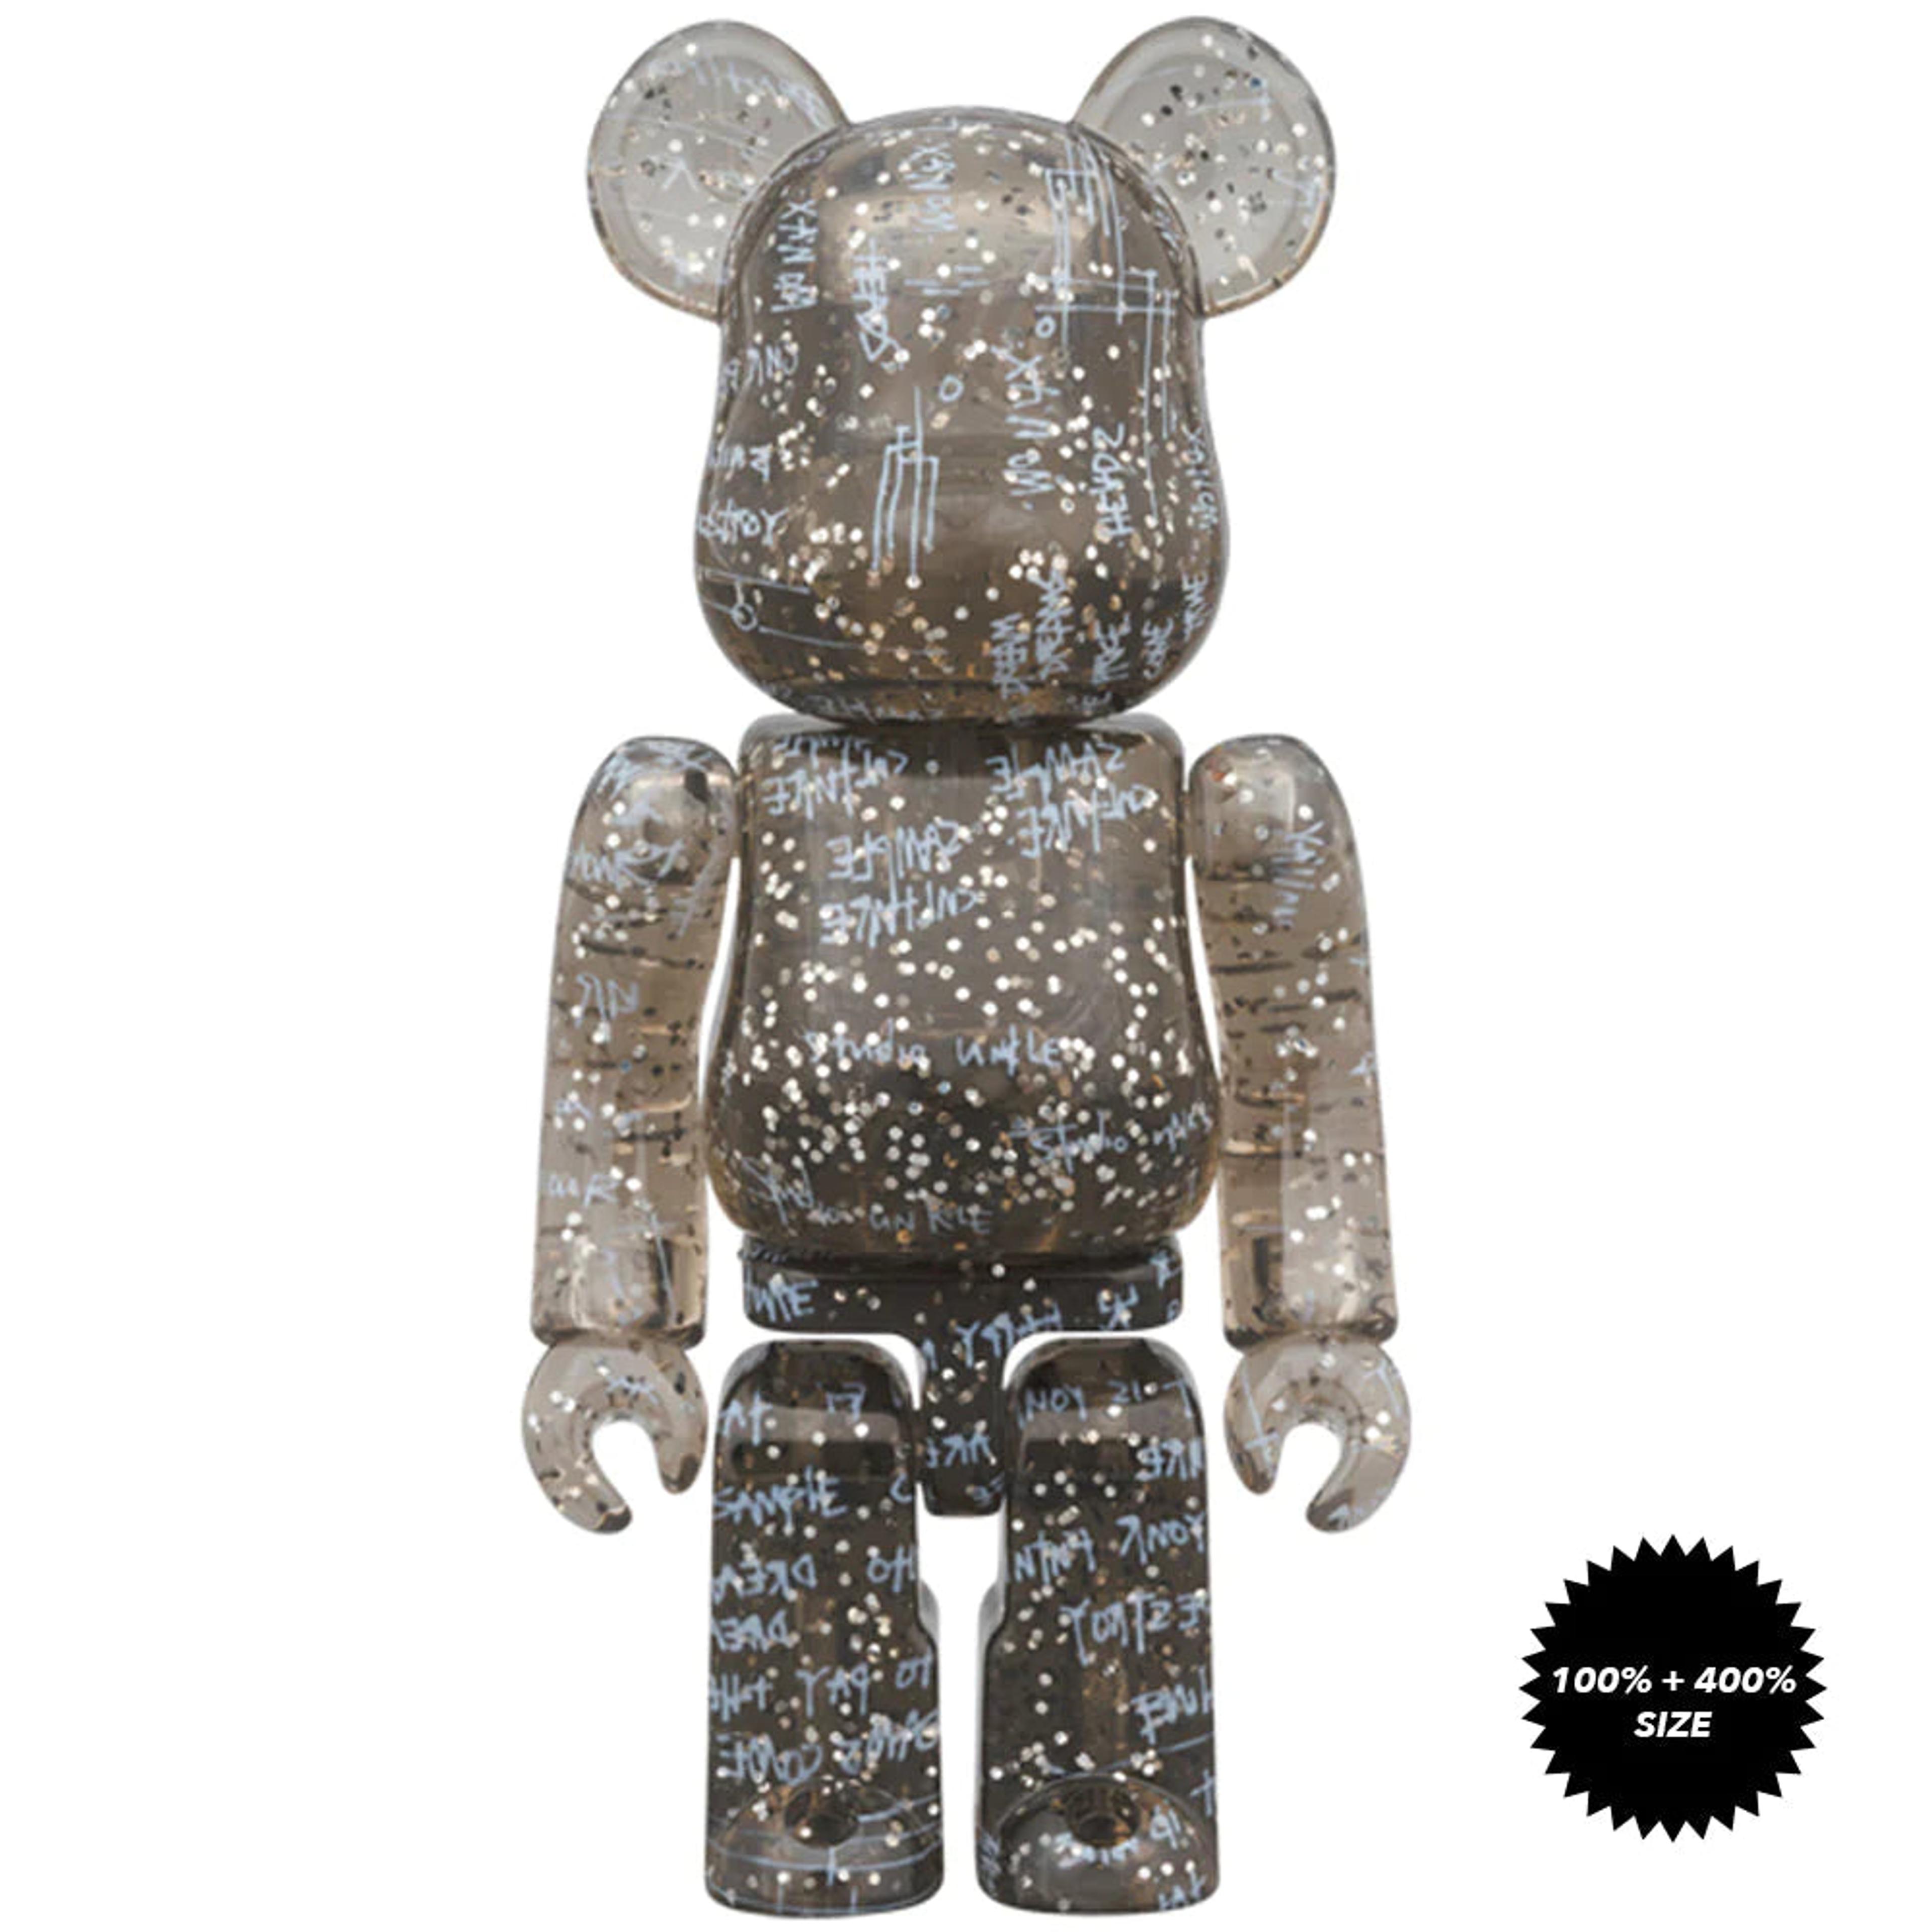 Alternate View 1 of BE@RBRICK UNKLE X STUDIO AR.MOUR 400％ + 100%